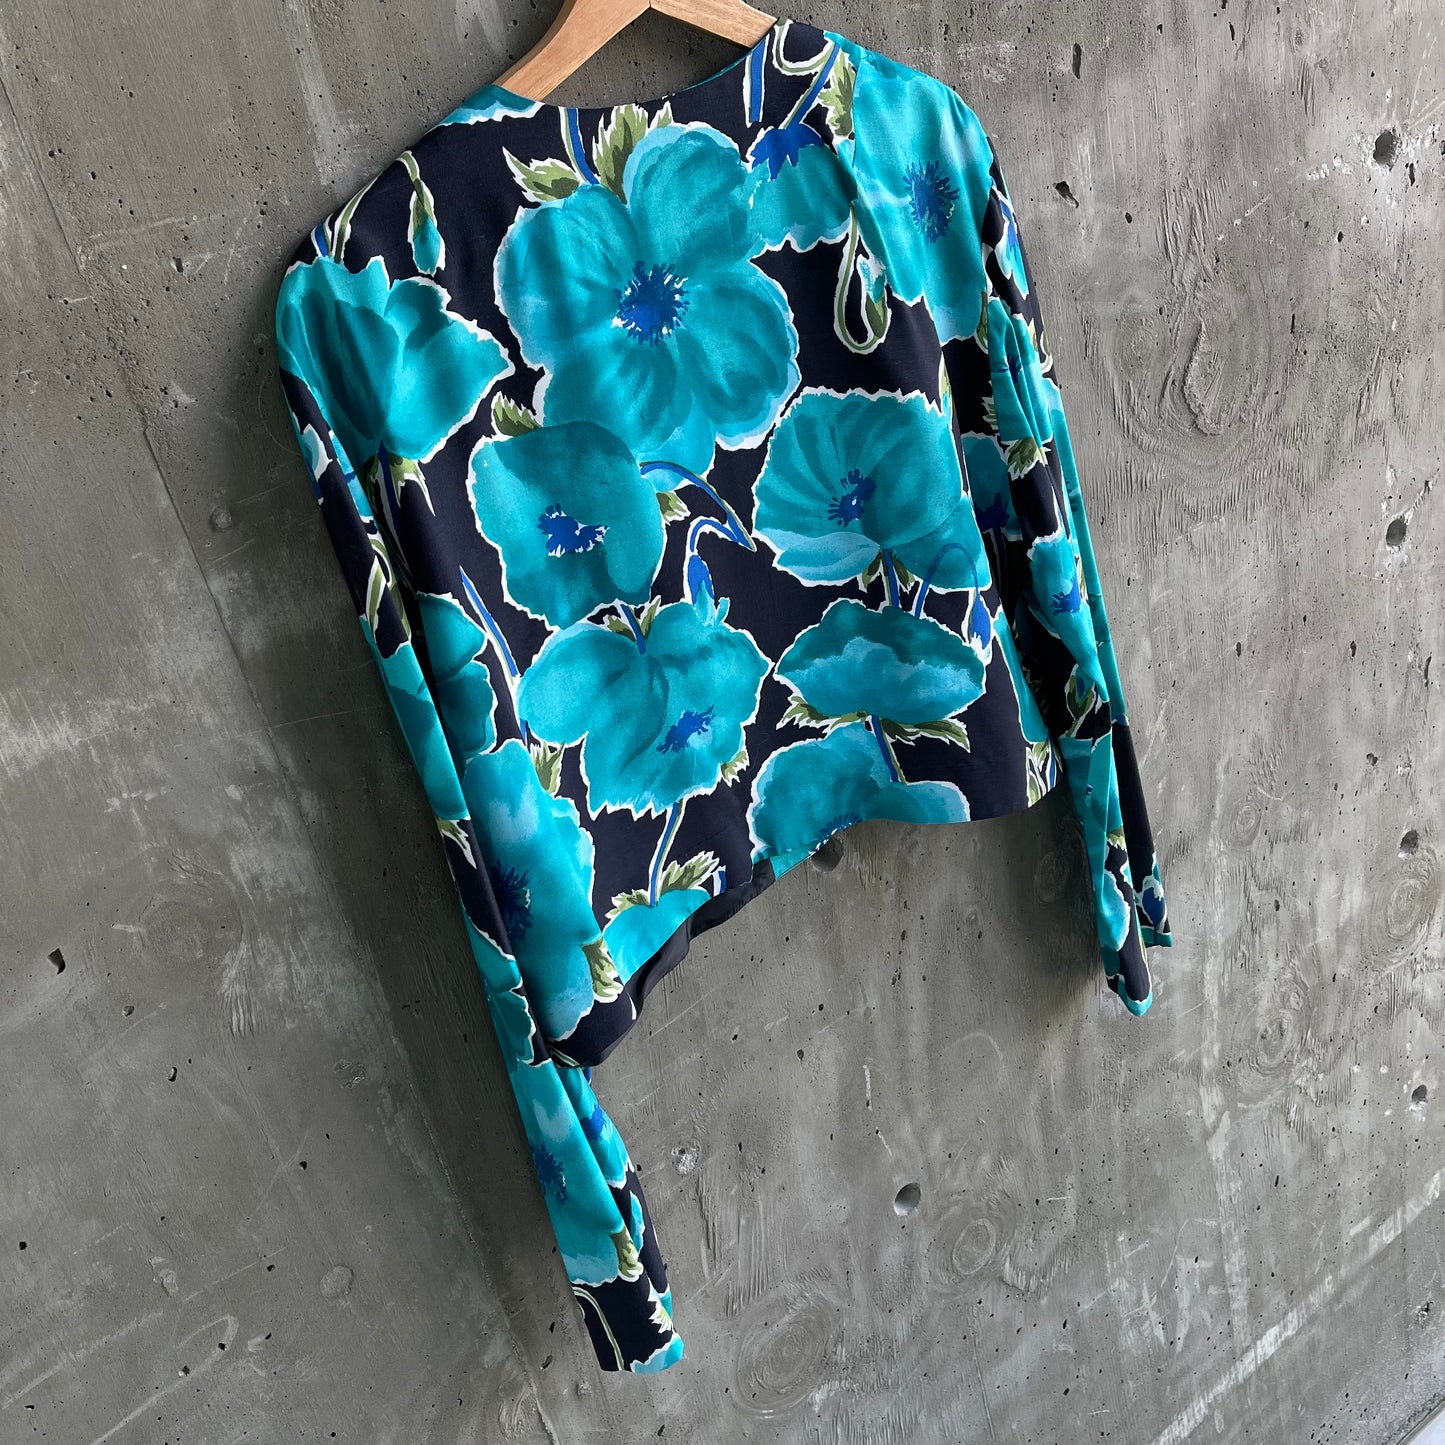 Vintage 70’s Floral Top by California Girl